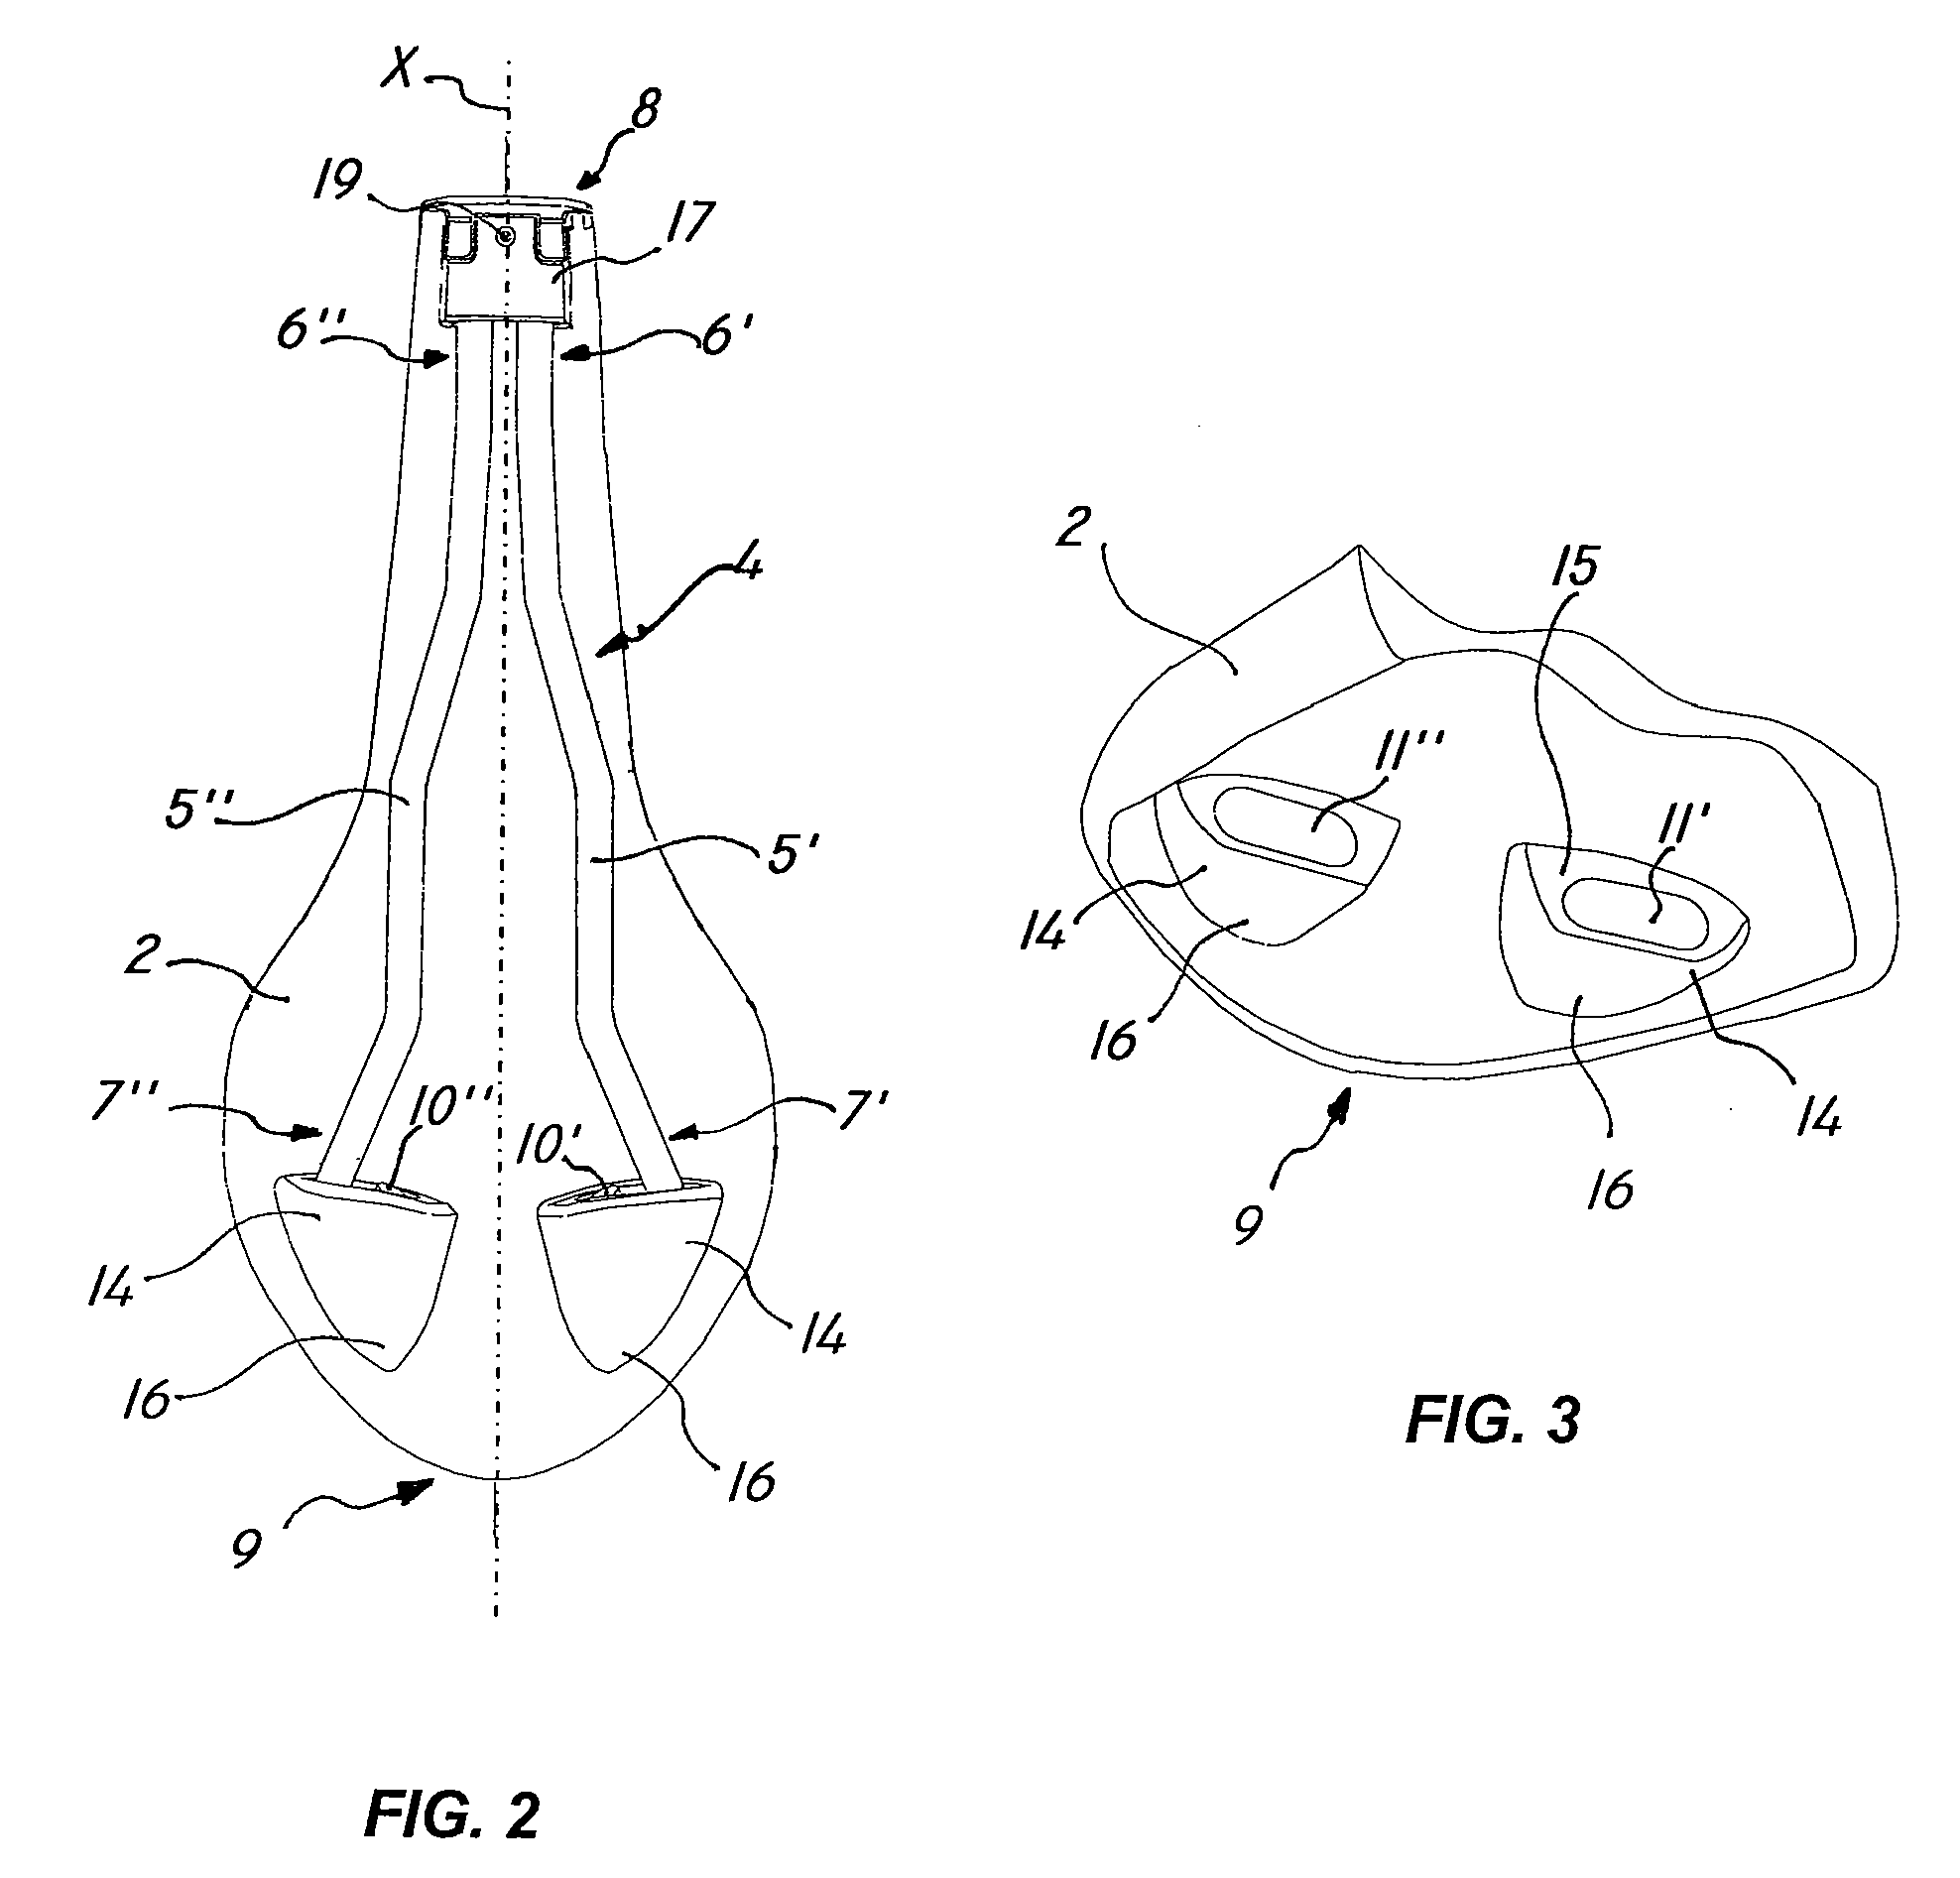 Mounting Assembly For Stable Attachment of a Seat, Particularly a Bicycle Saddle